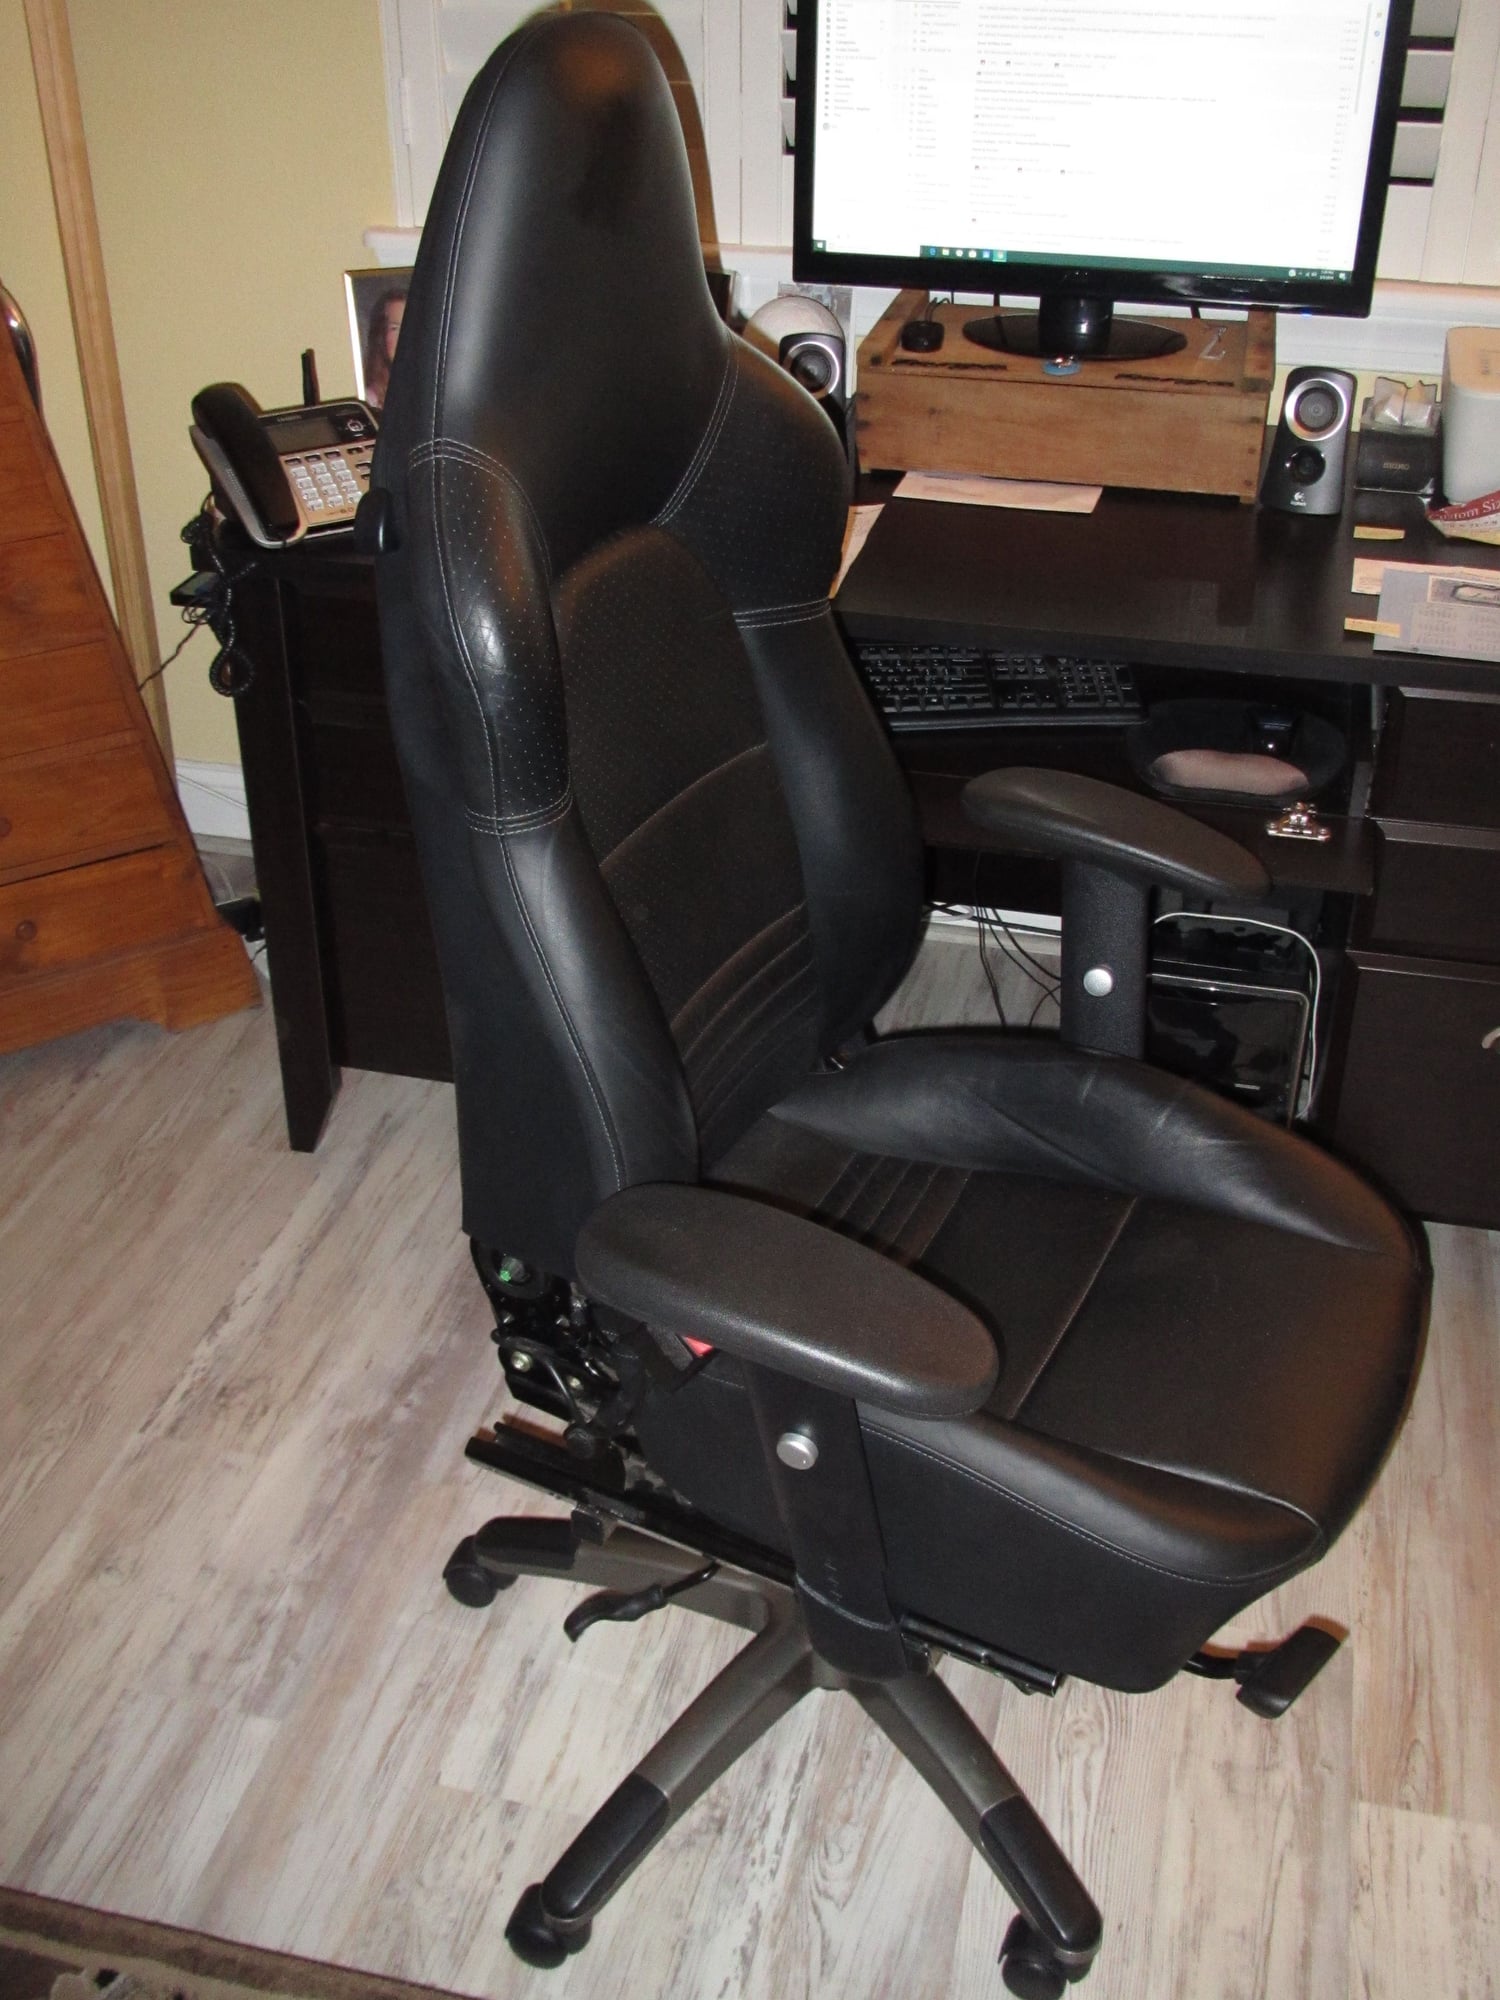 Miscellaneous - Porsche Office/Desk Chair - Used - All Years Porsche All Models - Palm Coast, FL 32137, United States